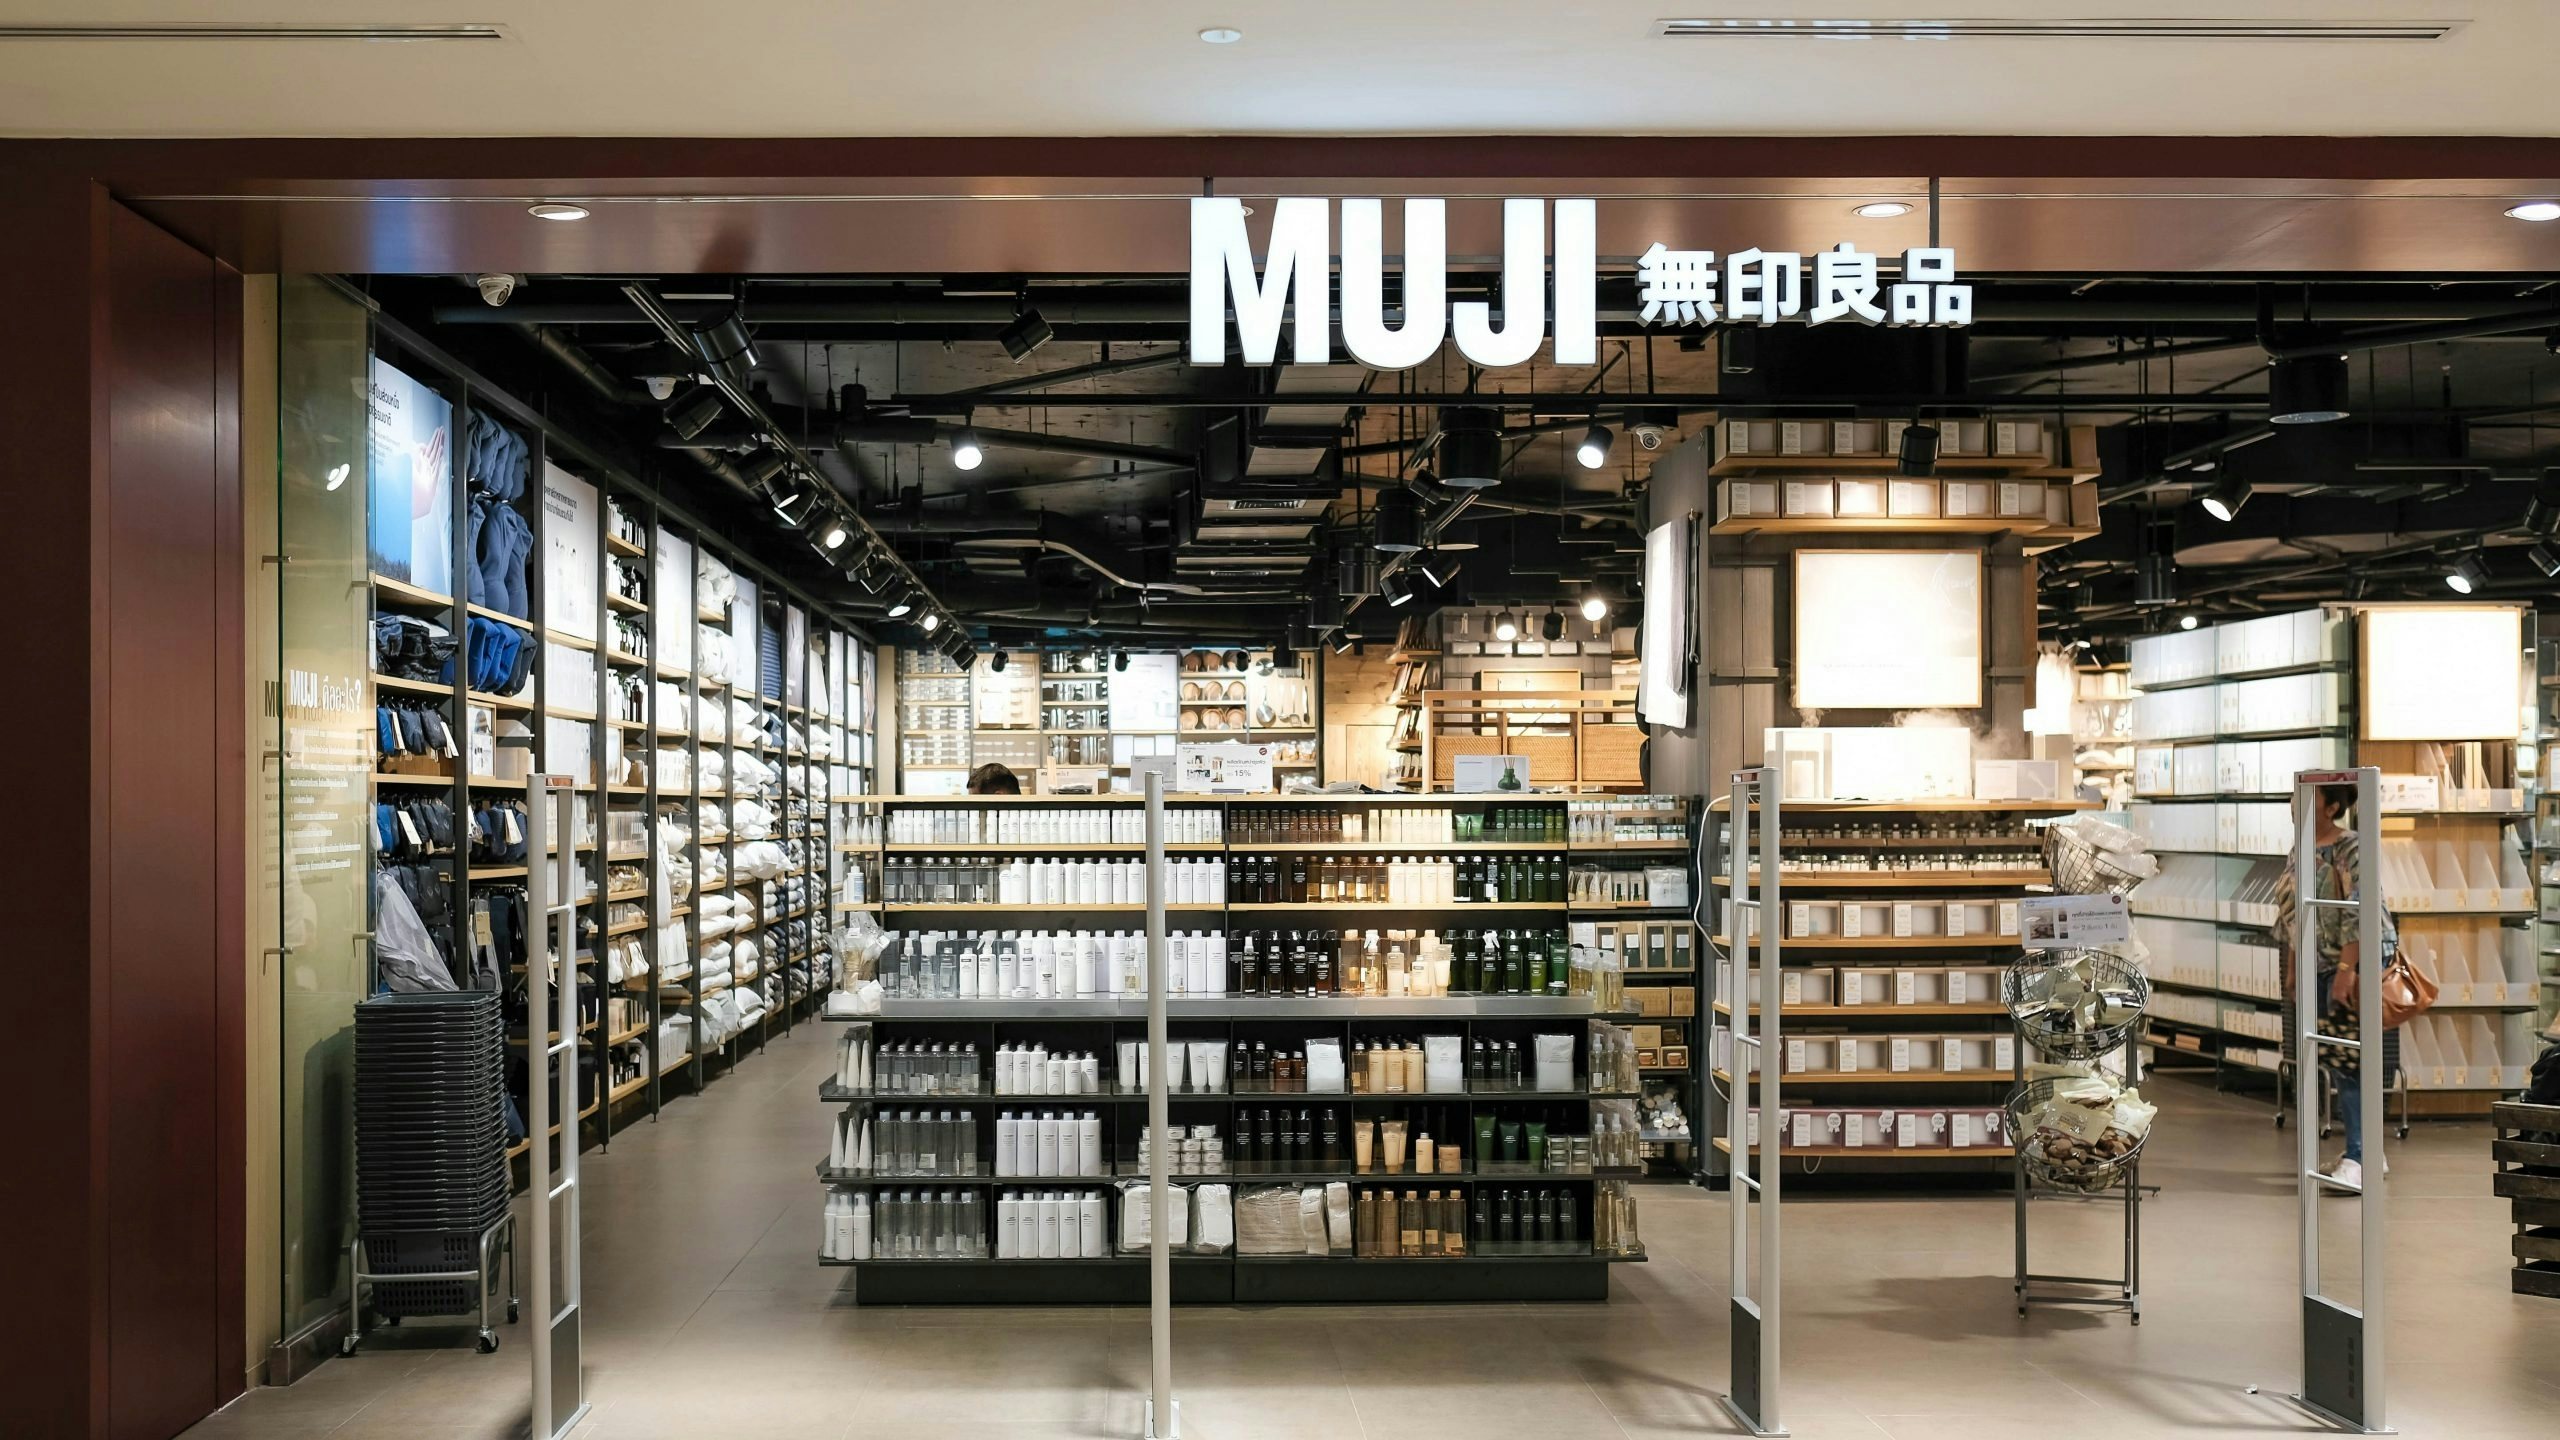 The hashtag #why Chinese people don't like to buy Muji anymore# has over 340 million views. Does the Japanese retailer need to brace for a backlash? Photo: Shutterstock